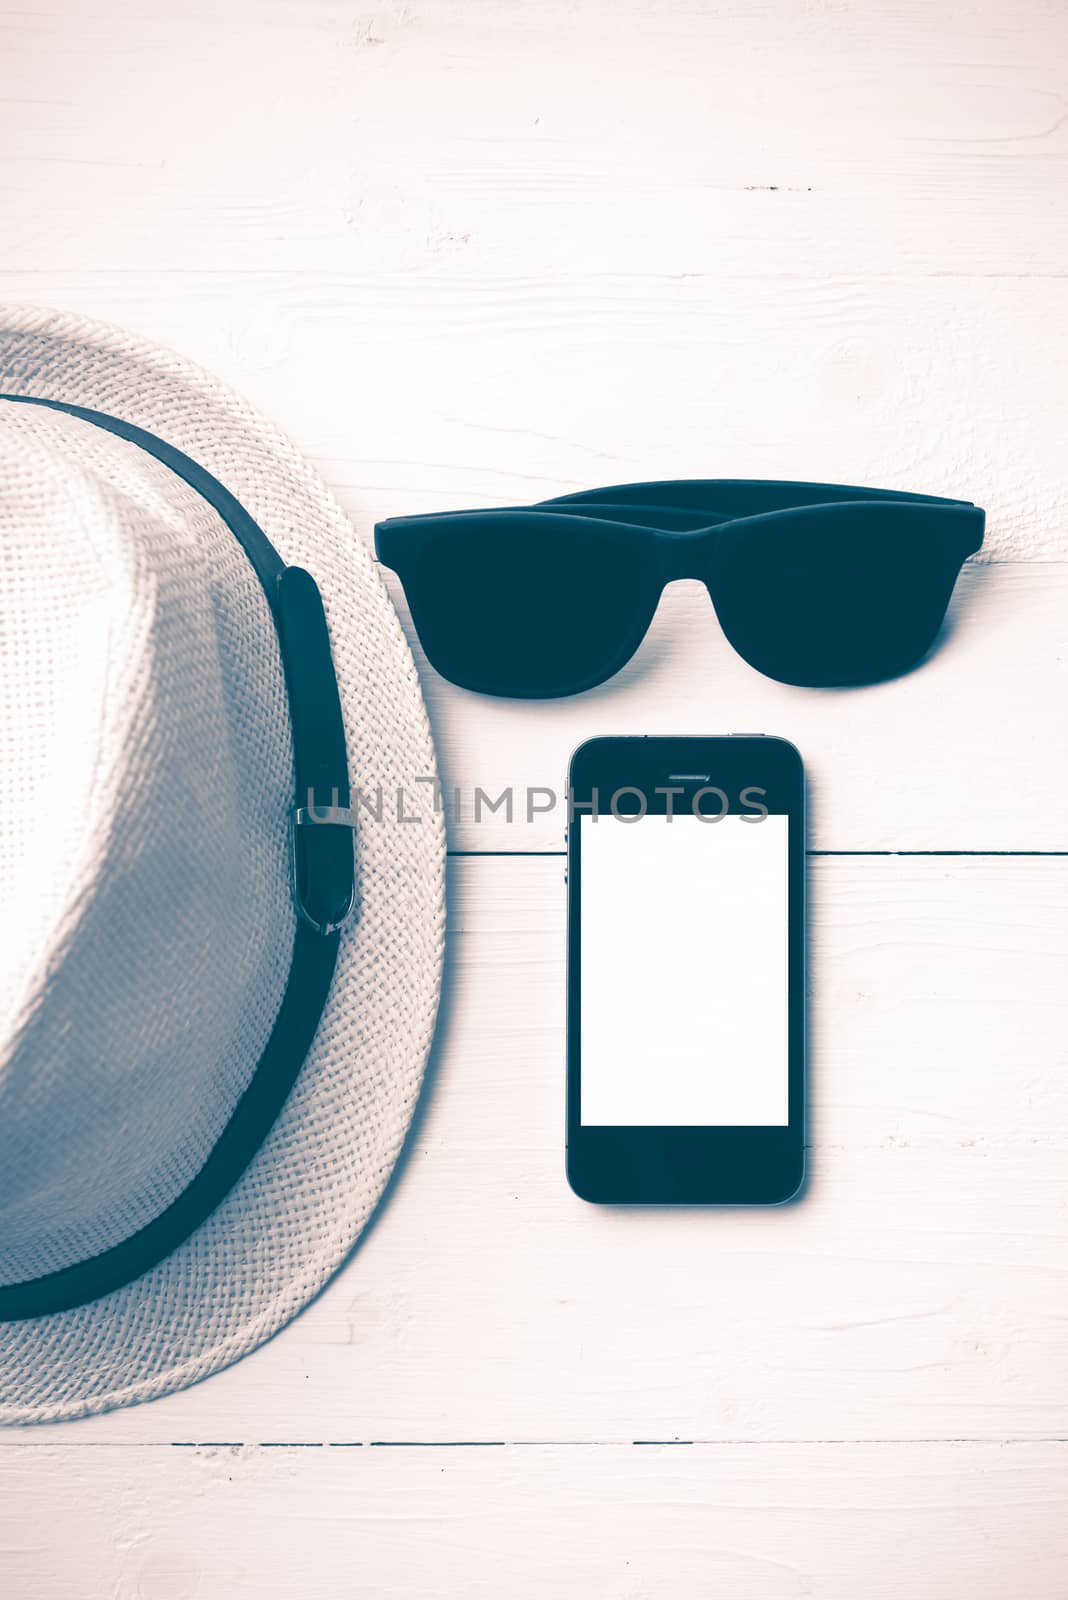 hat sunglasses and smart phone on white table vintage style